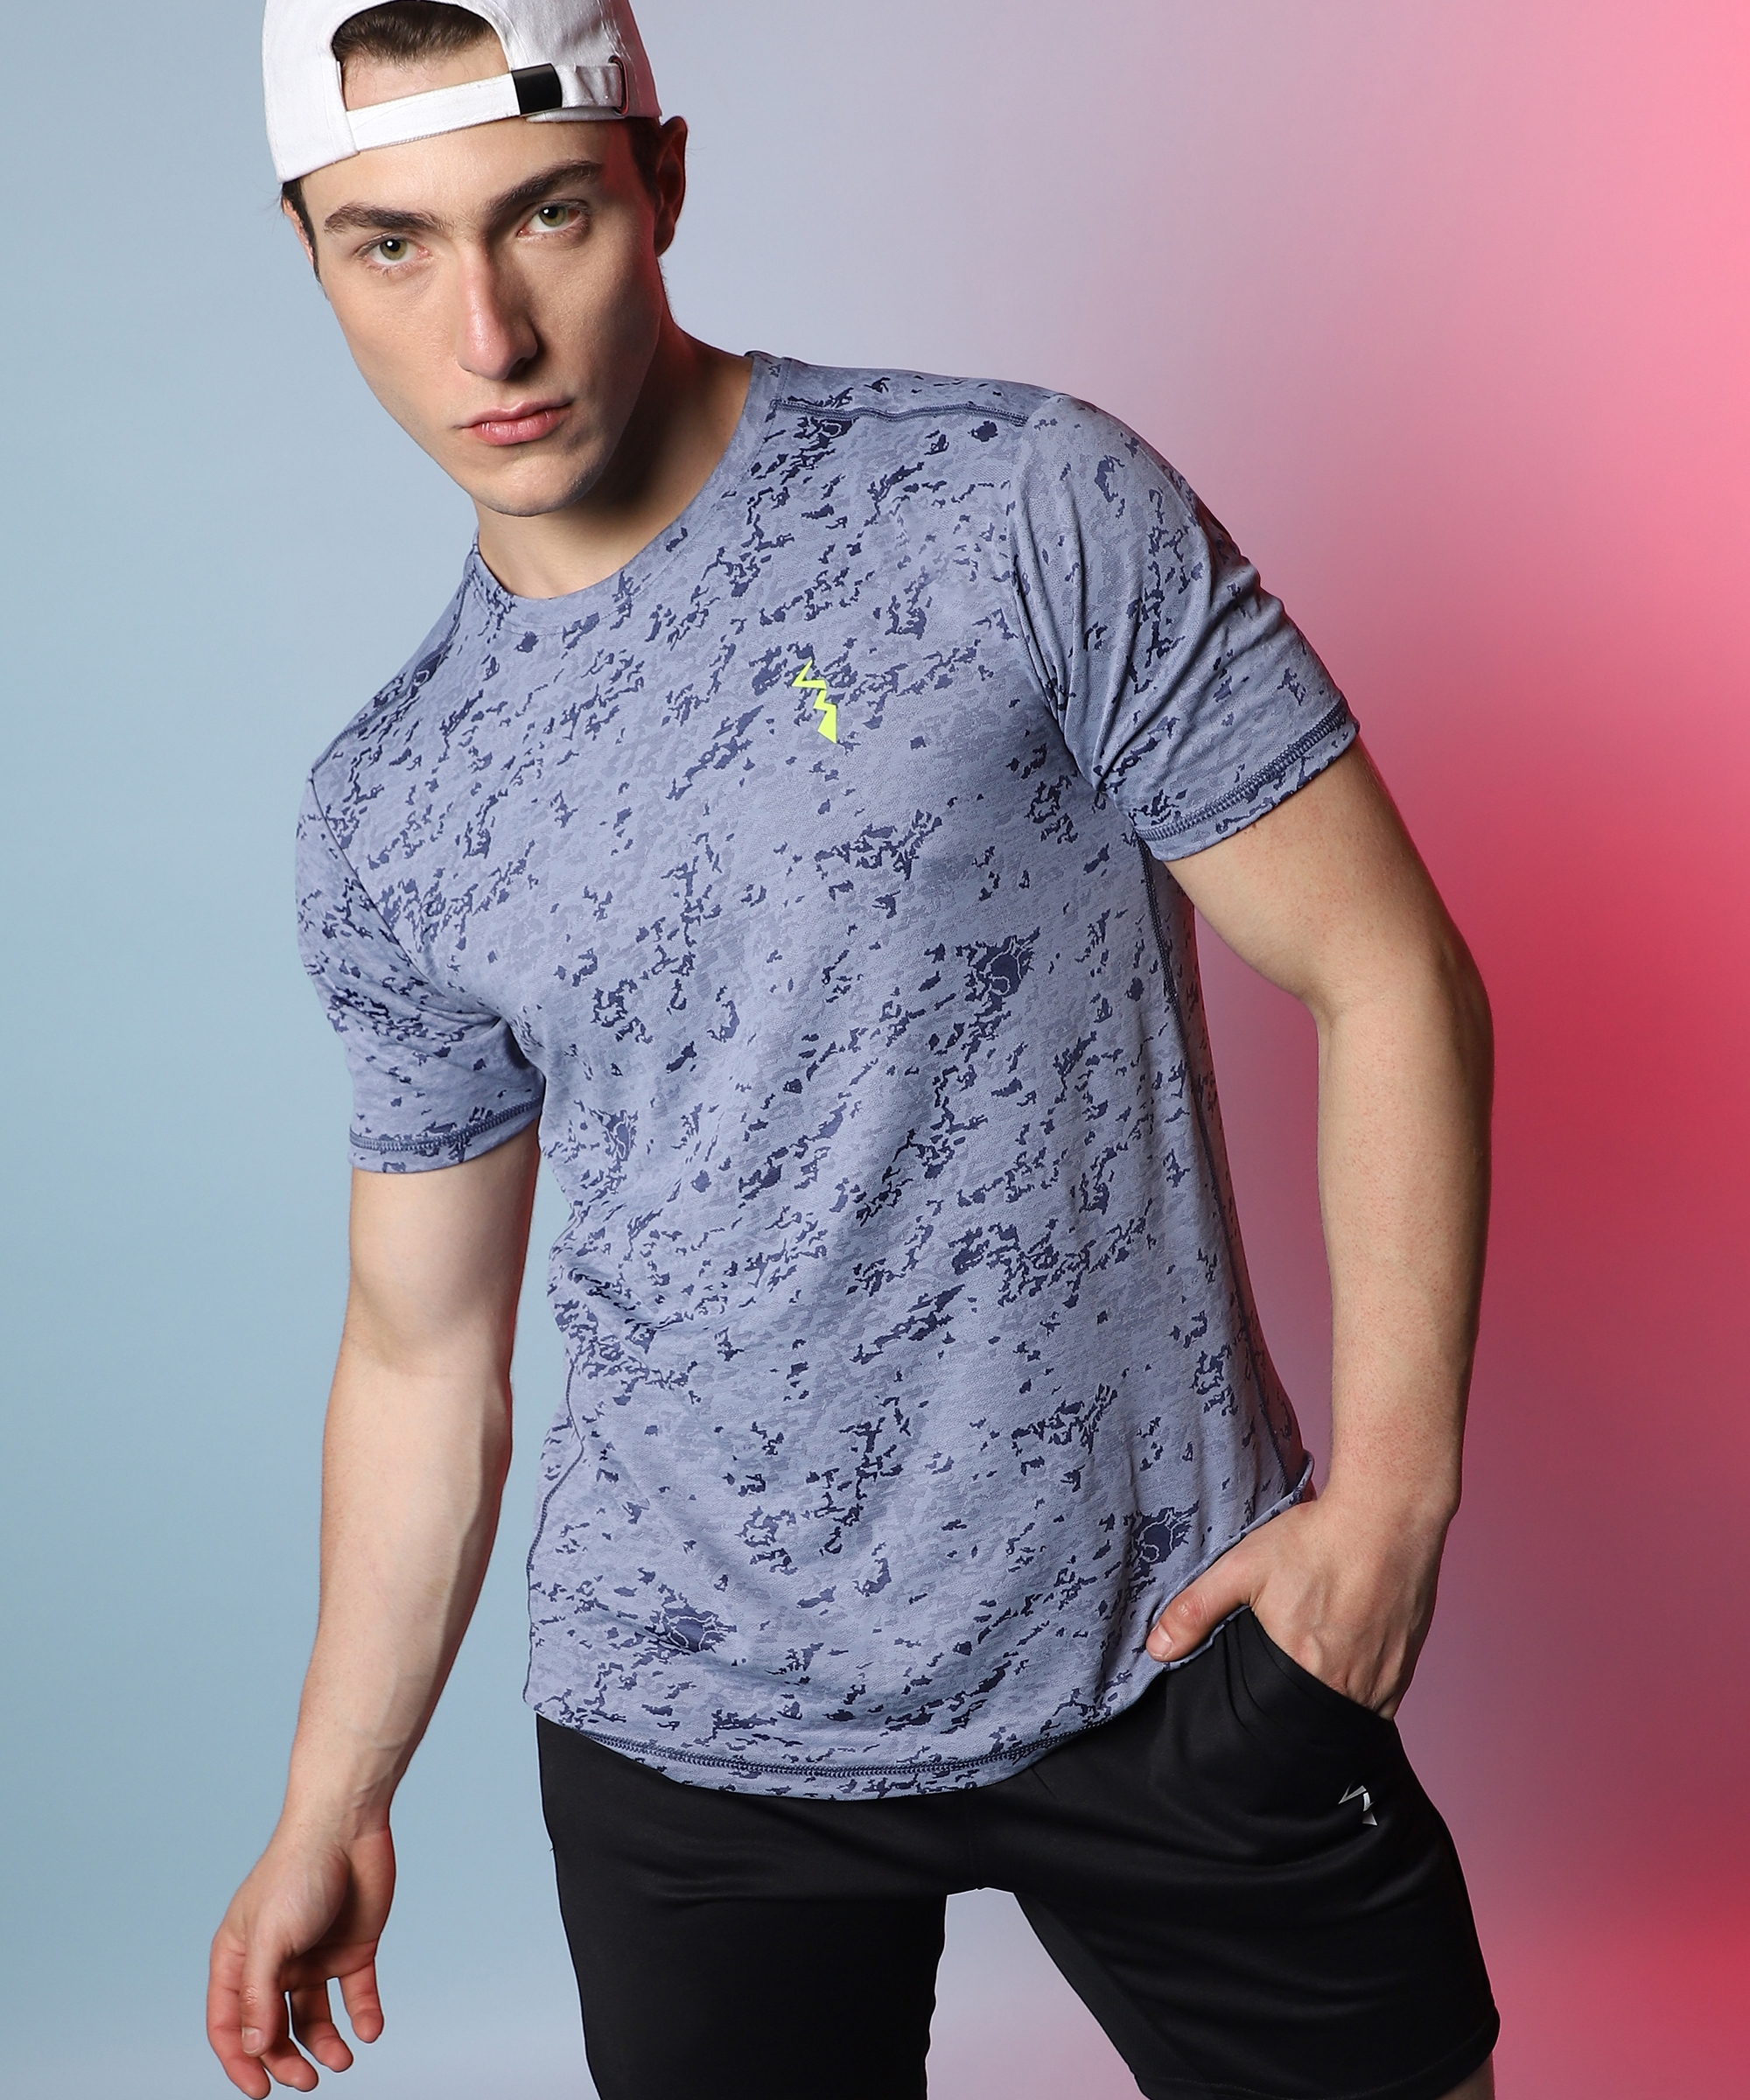 CAMPUS SUTRA | Men's Prussian Blue Printed Activewear T-Shirt